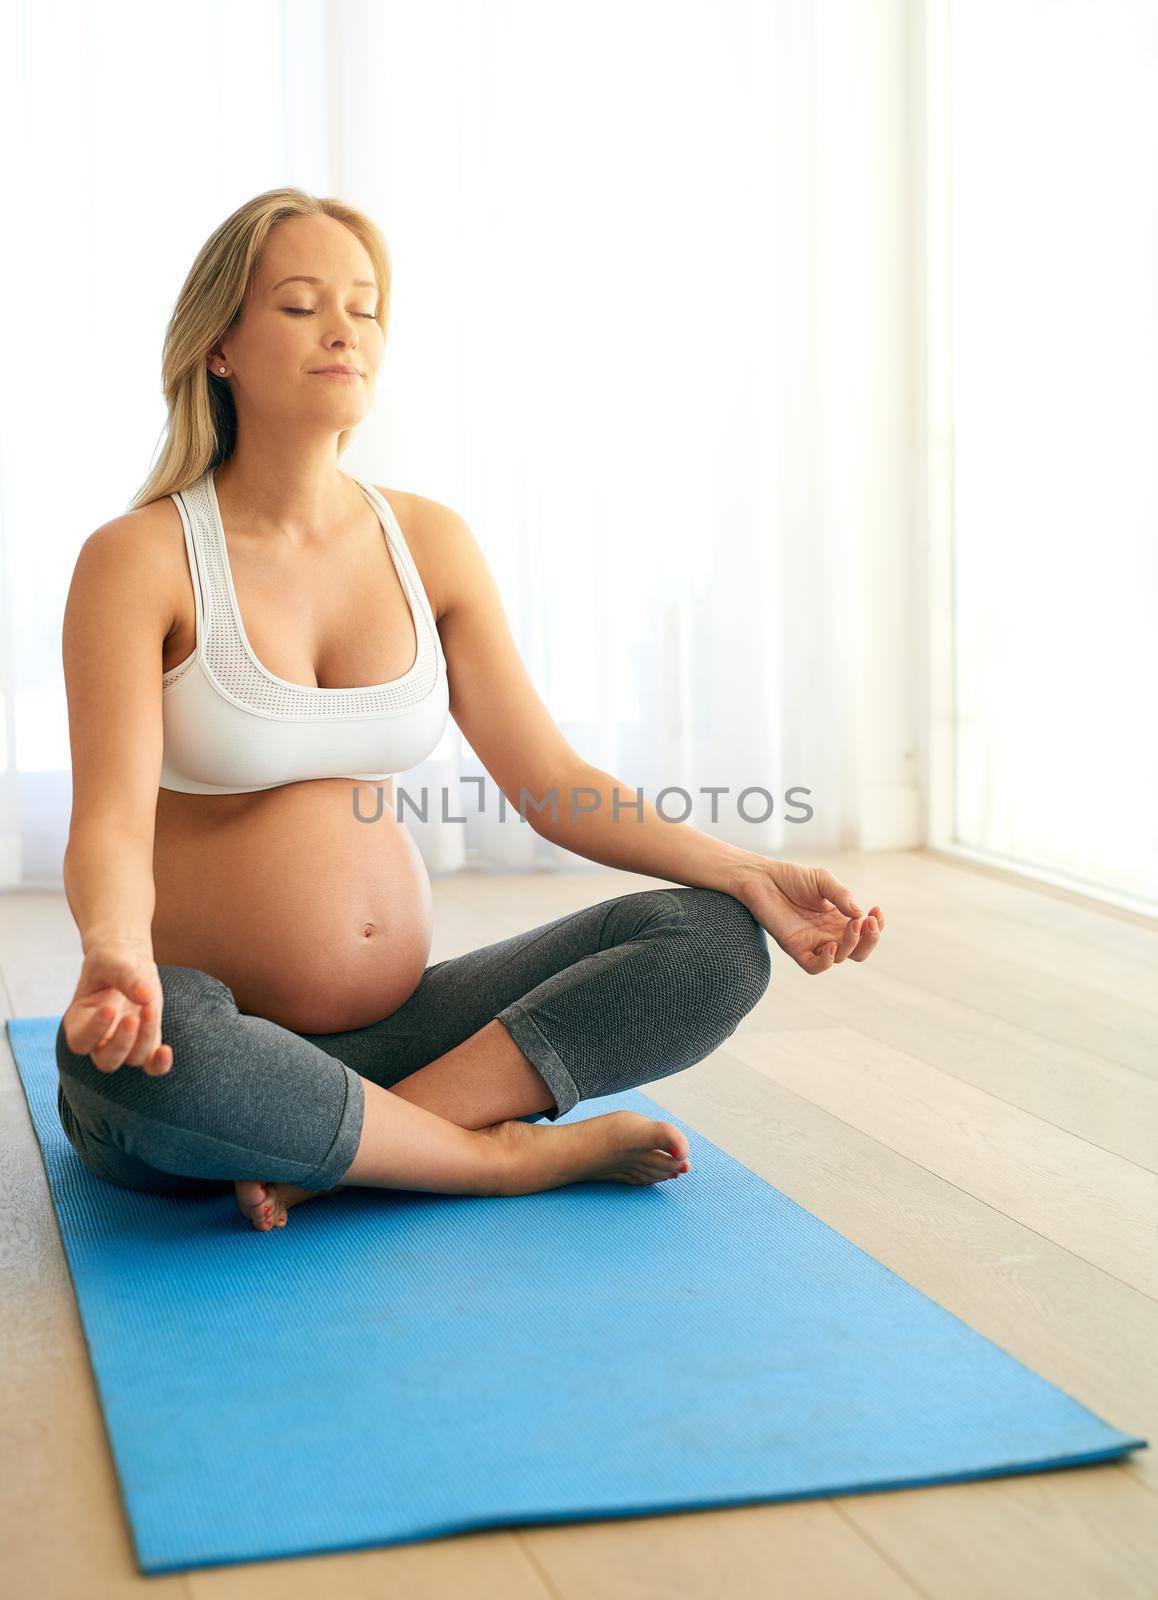 All is well with me and my baby. a pregnant woman meditating on an exercise mat at home